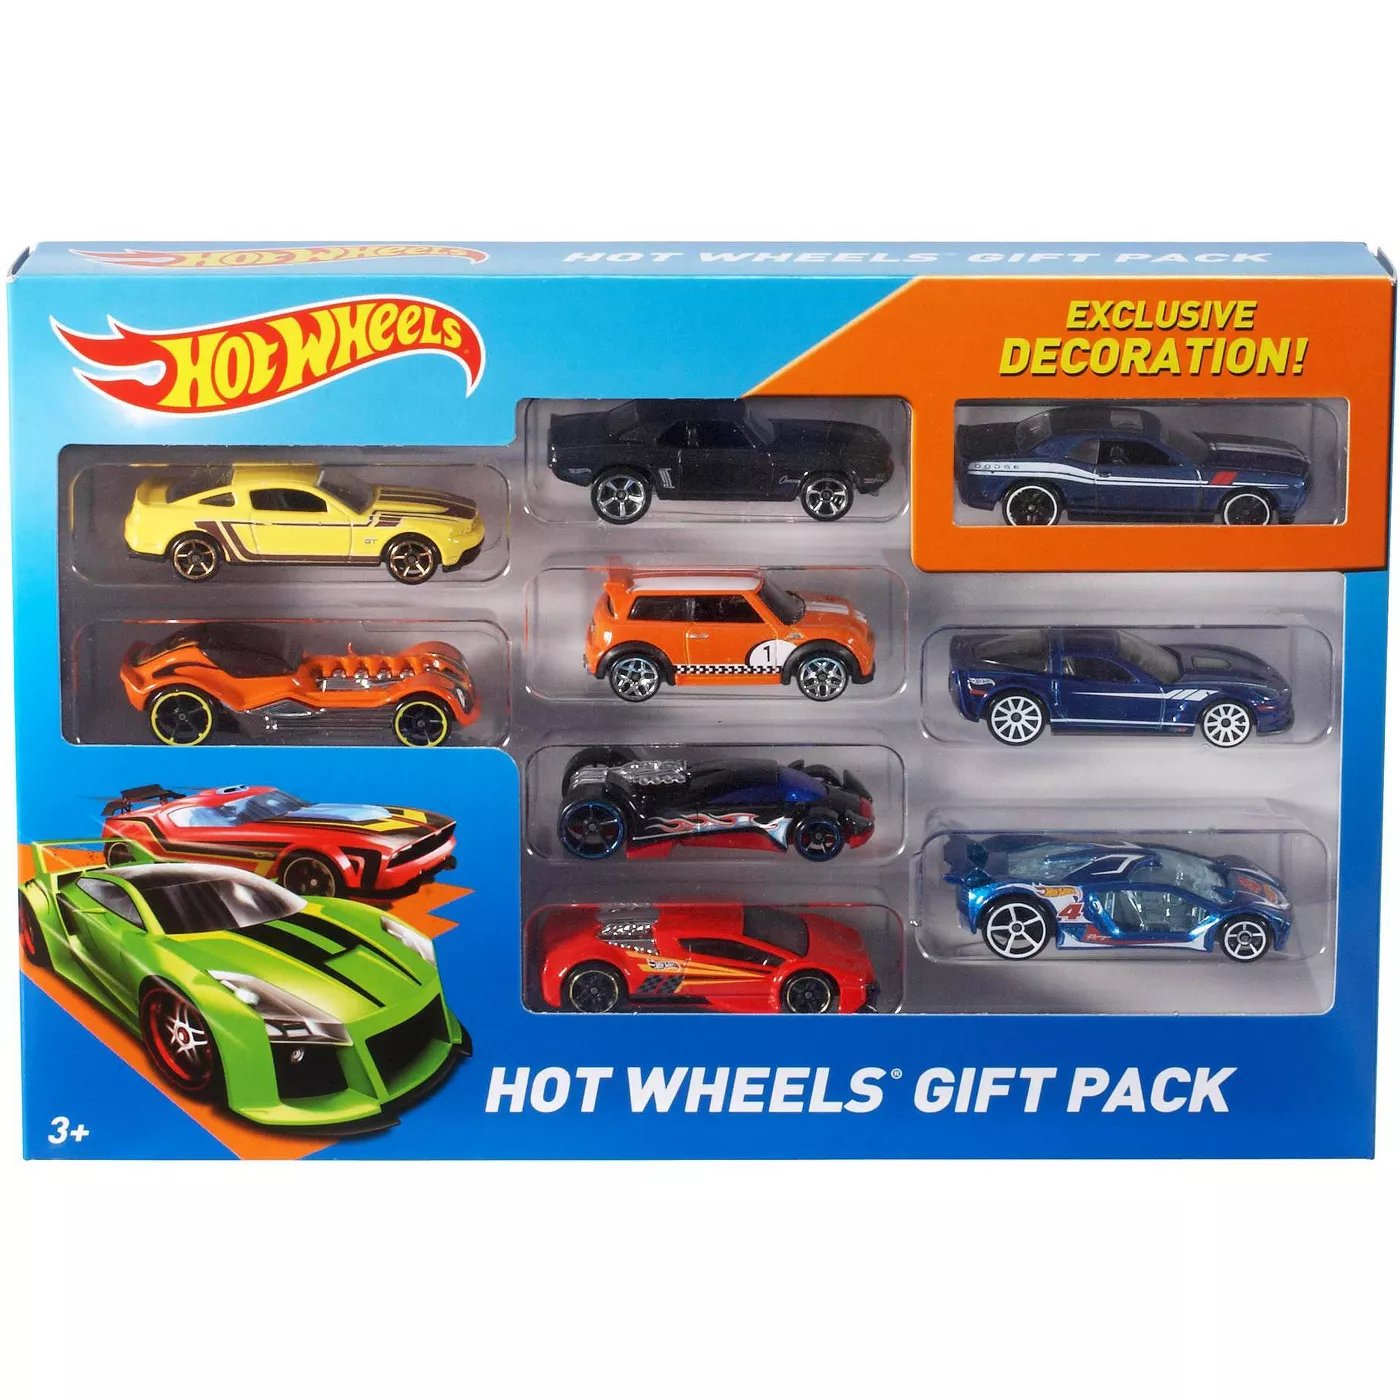 Hot Wheels Diecast 9 Car Gift Pack - image 1 of 9